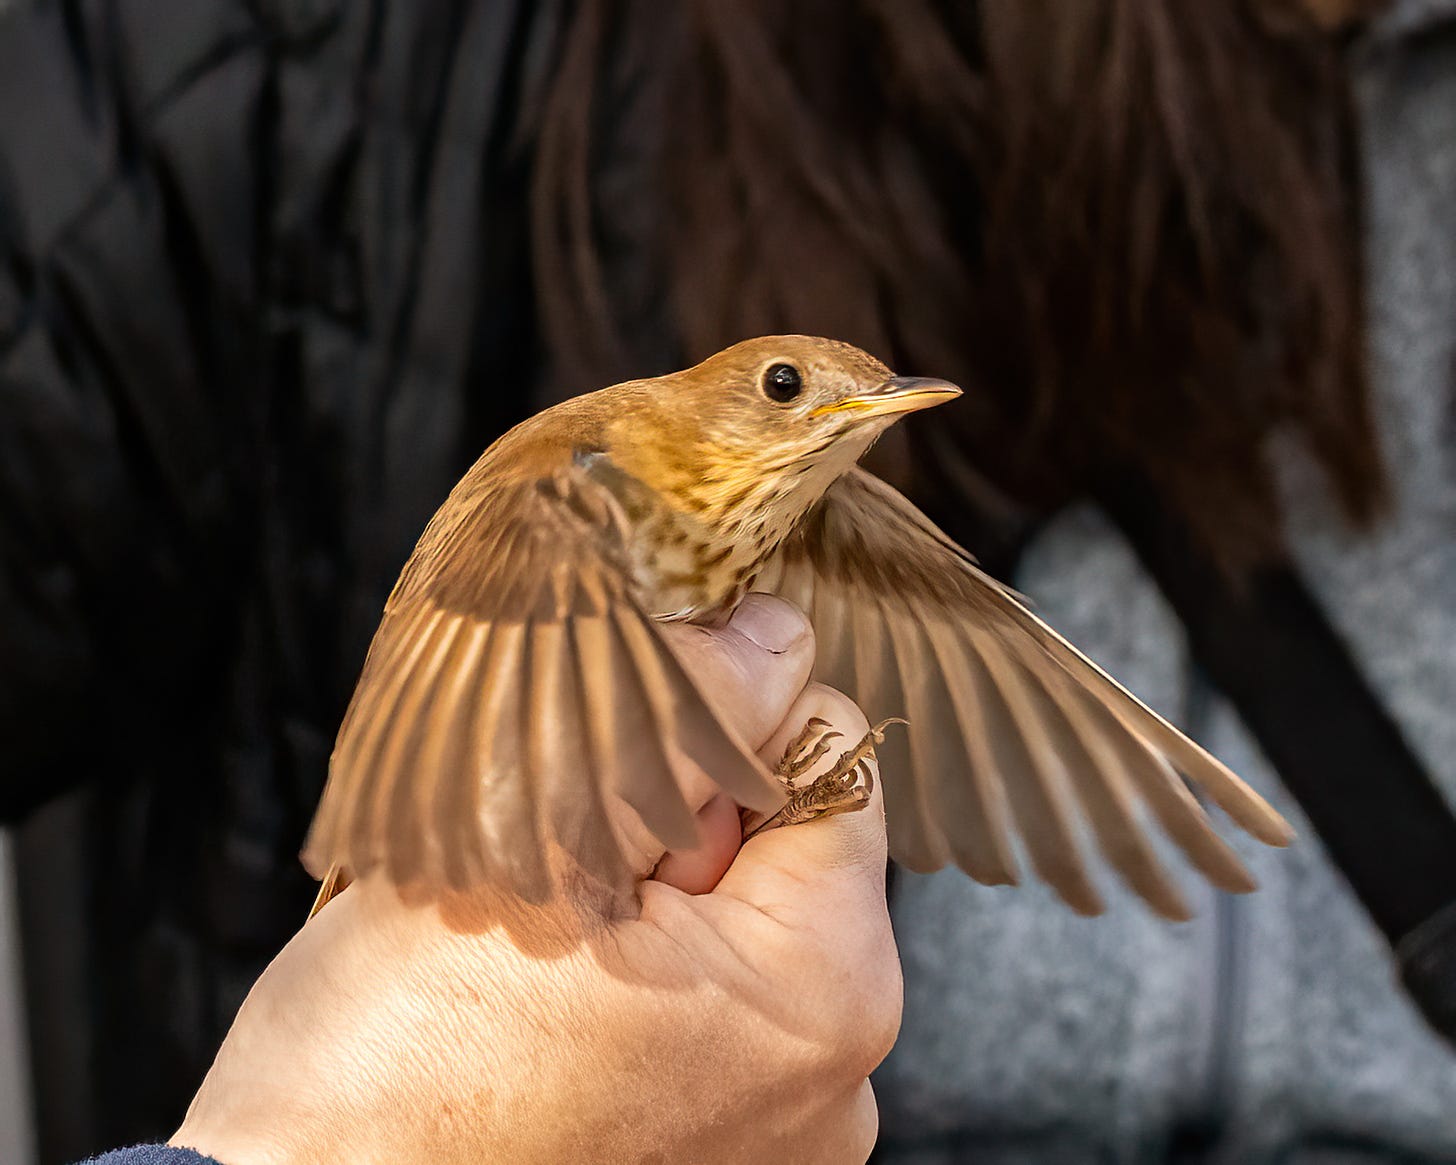 In this image a human hand holds a veery, which is flapping its wings in agitation. A veery is a rusty colored bird with speckles on its chest.